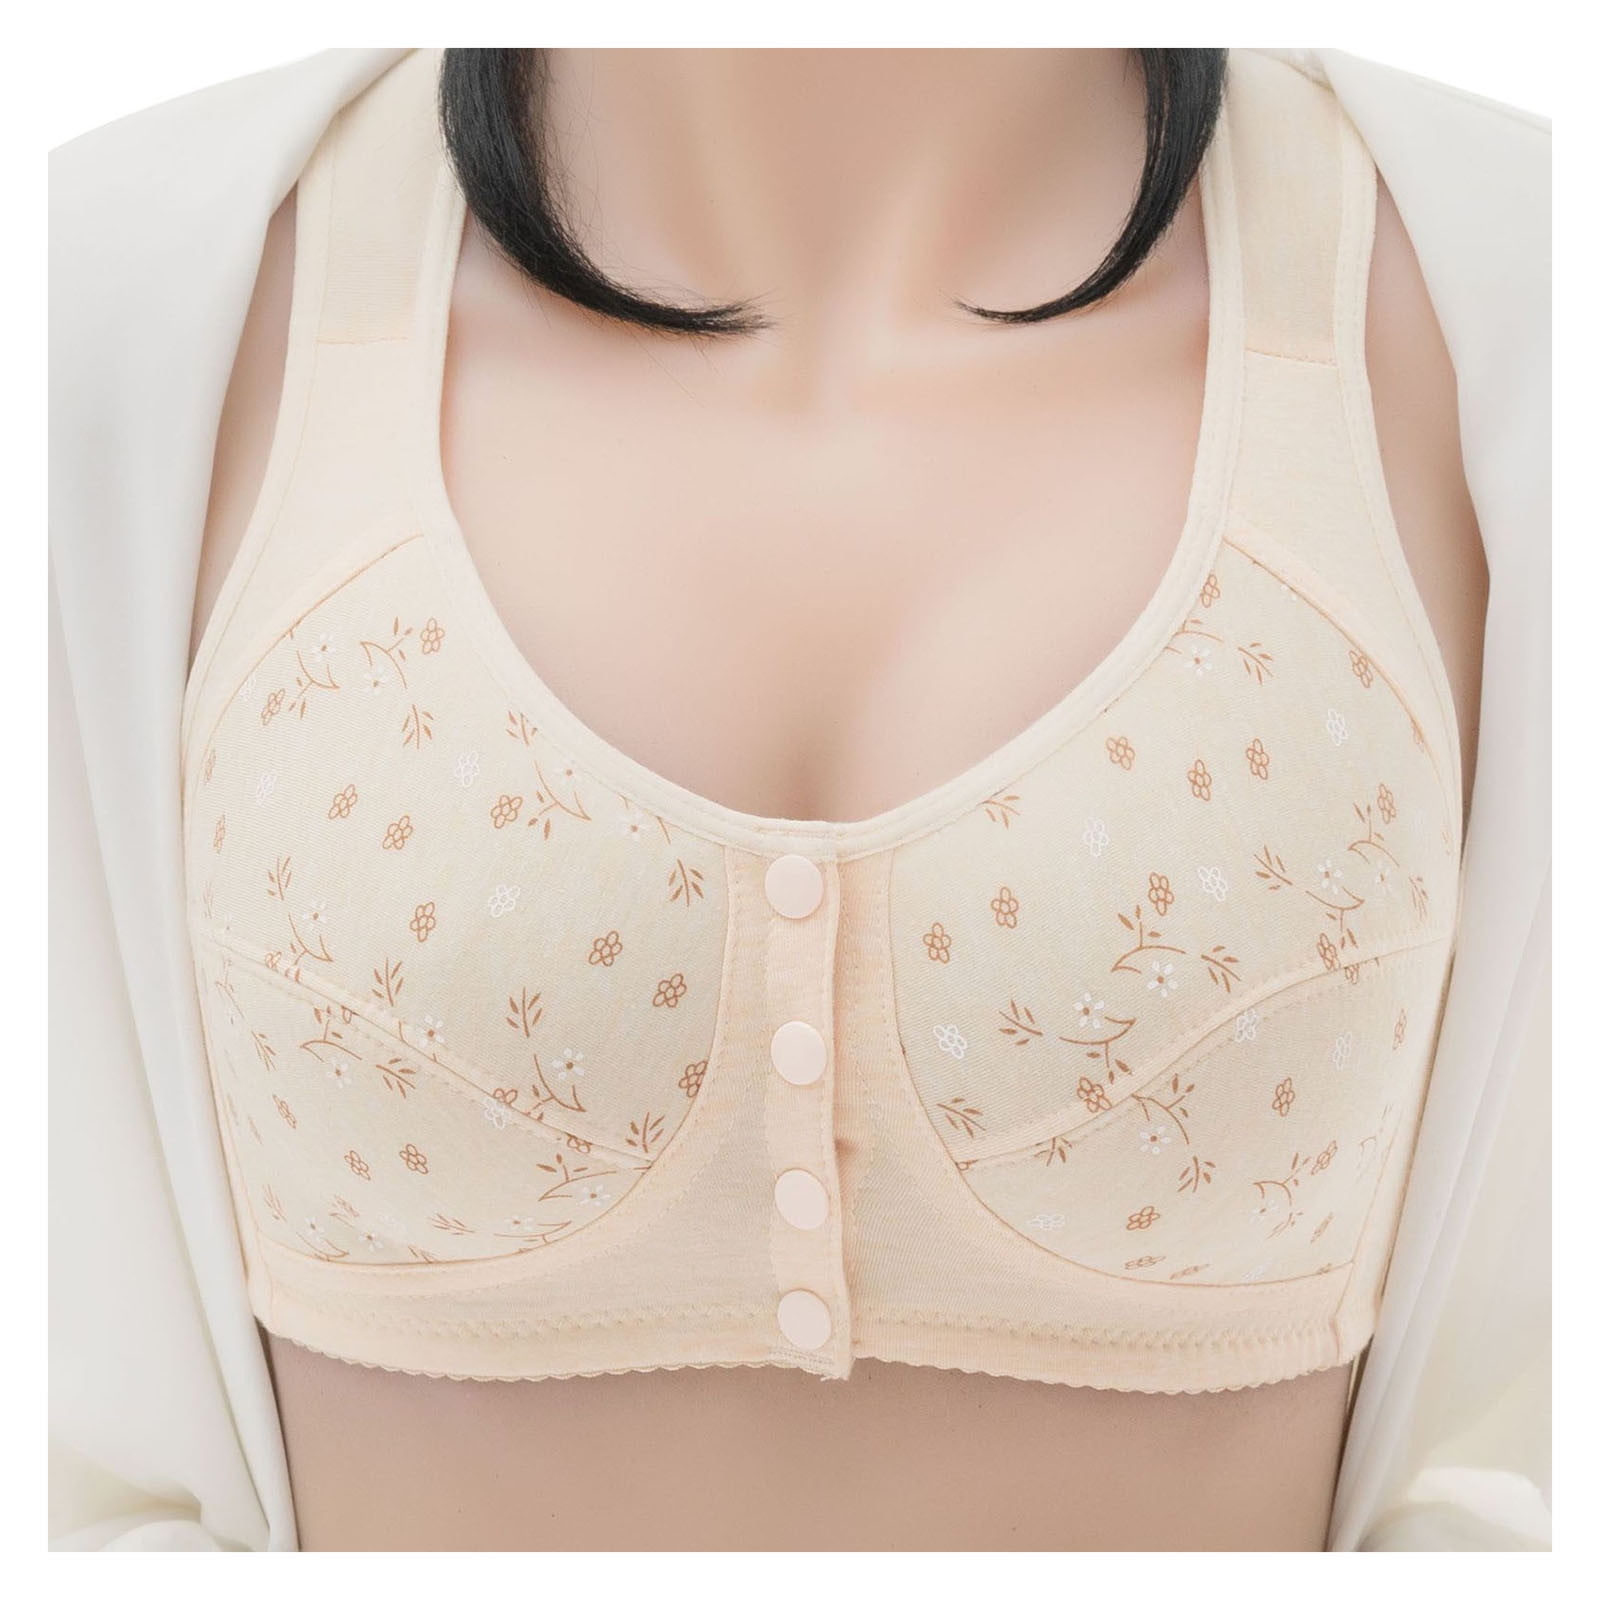 Soft And Comfortable Bra - OSYBUY Store